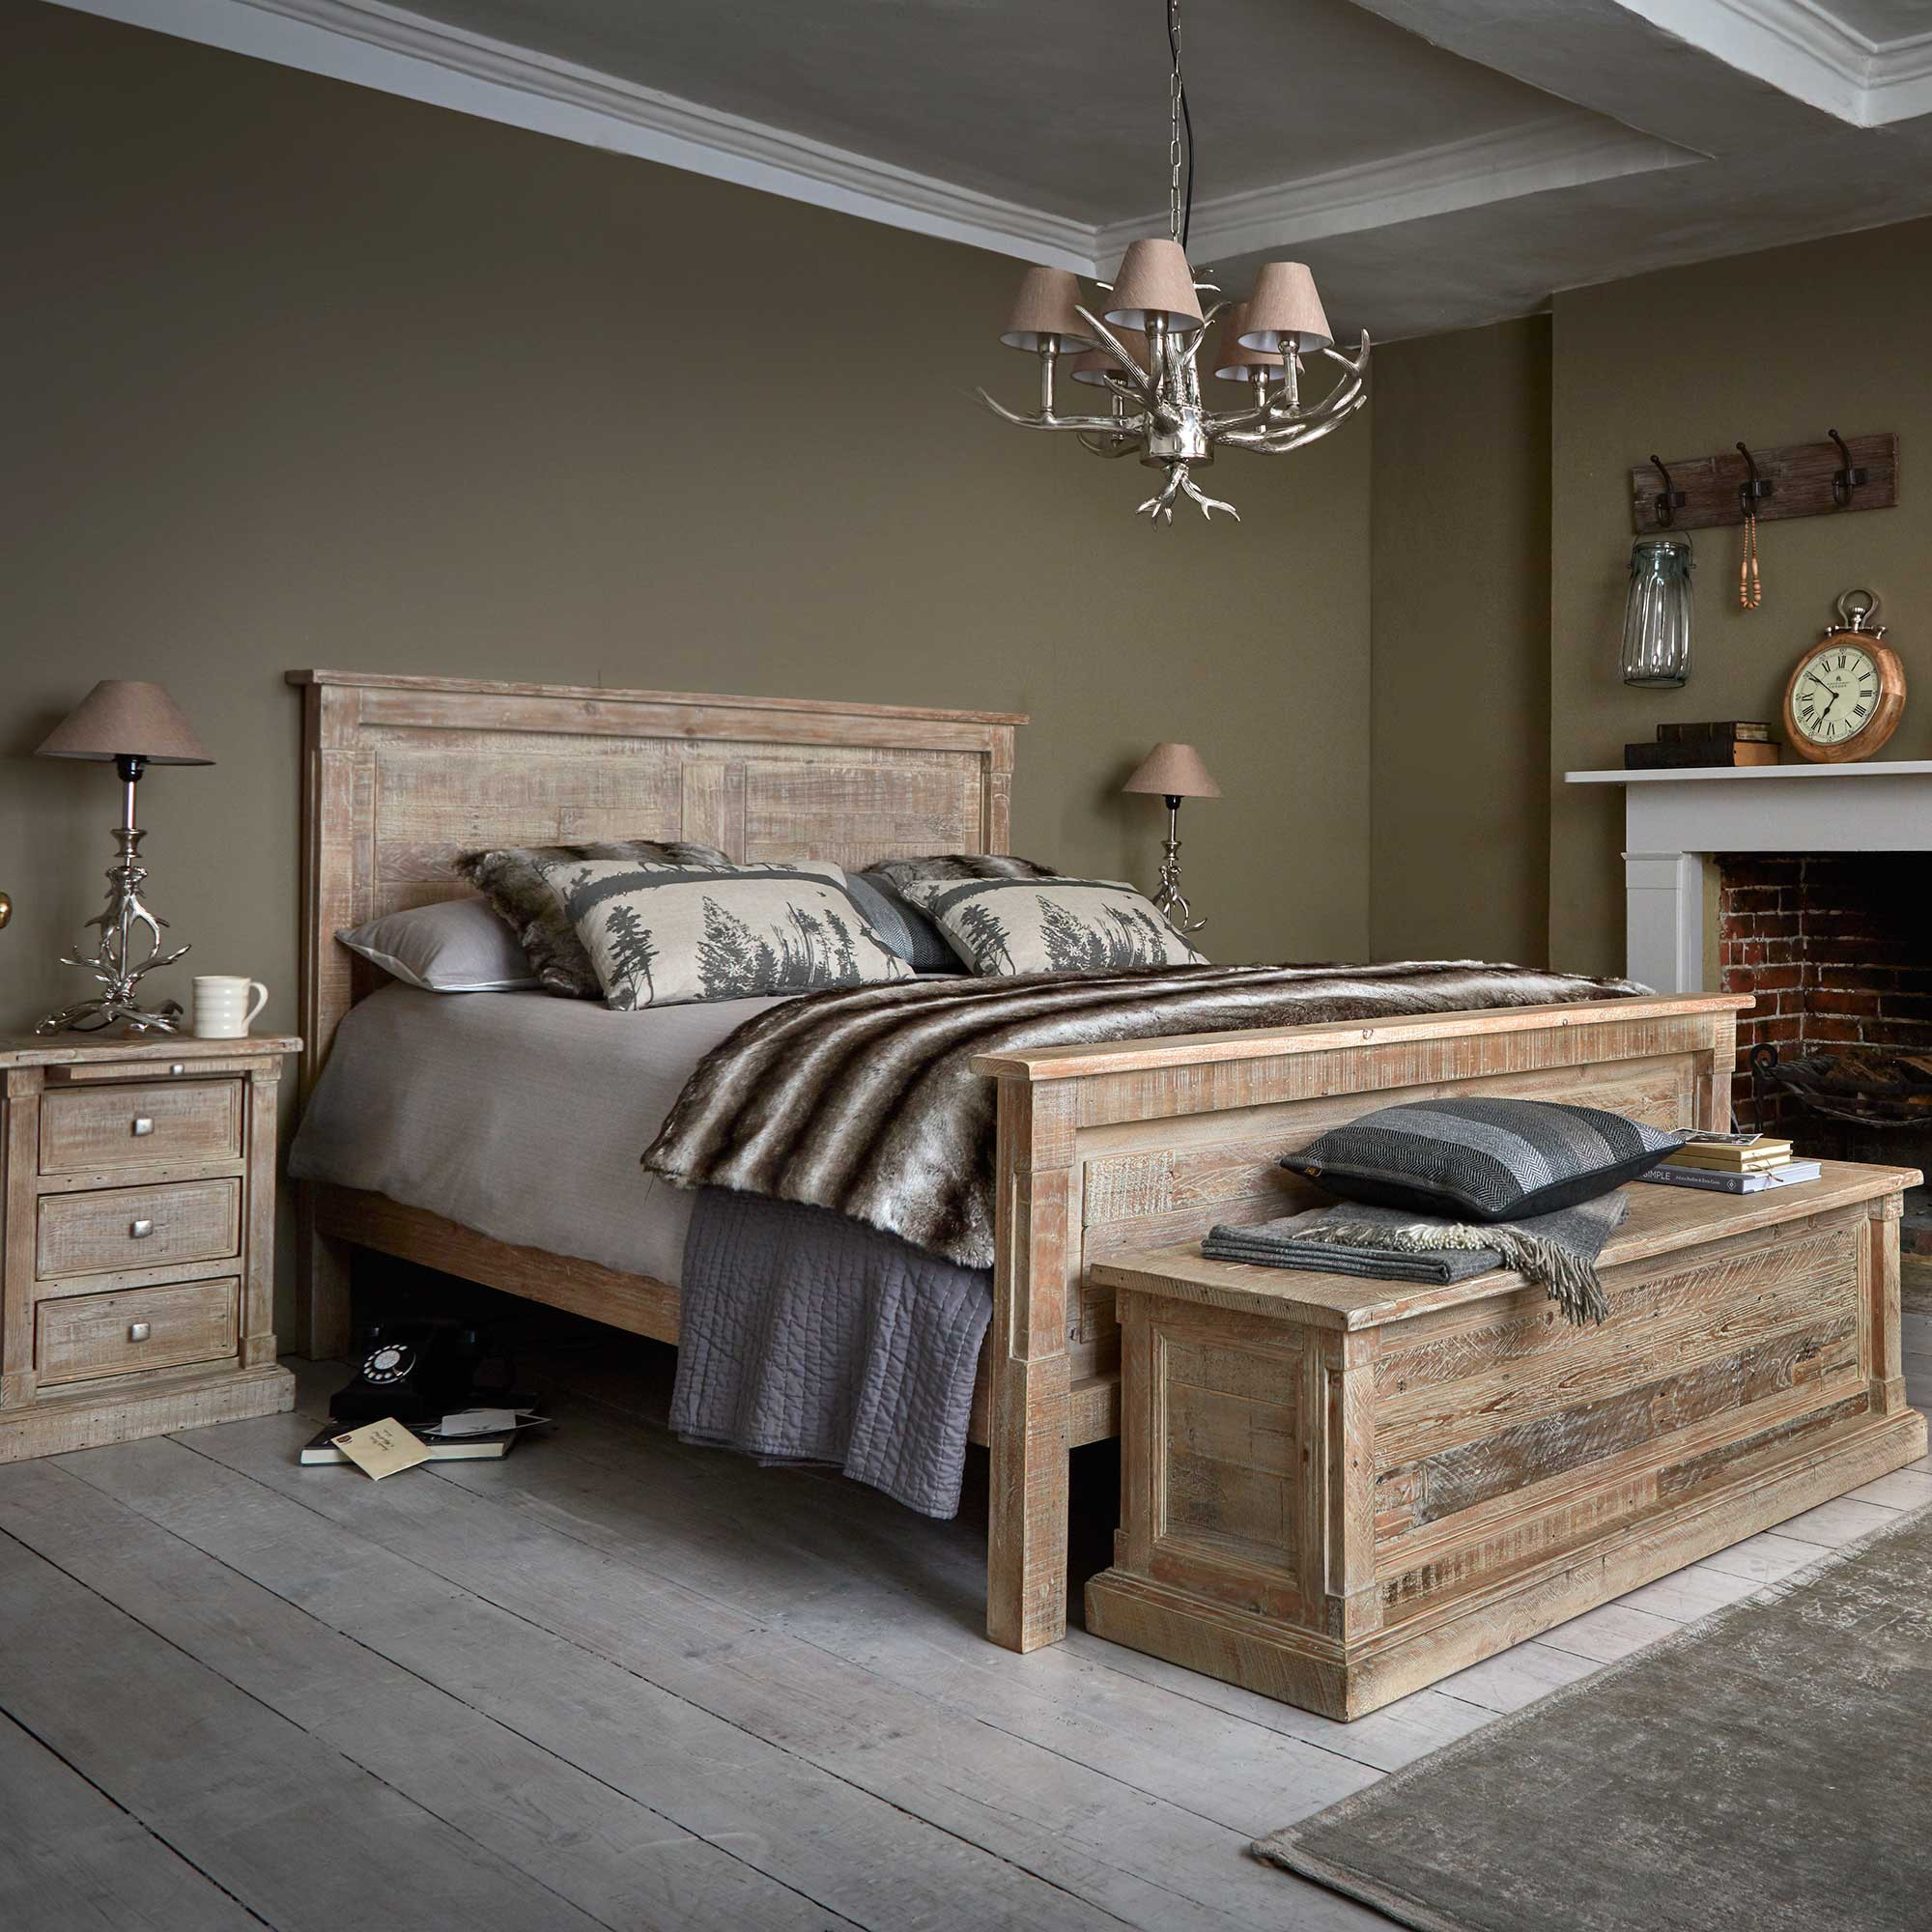 Rustic Farmhouse style Bedroom Furniture Sets